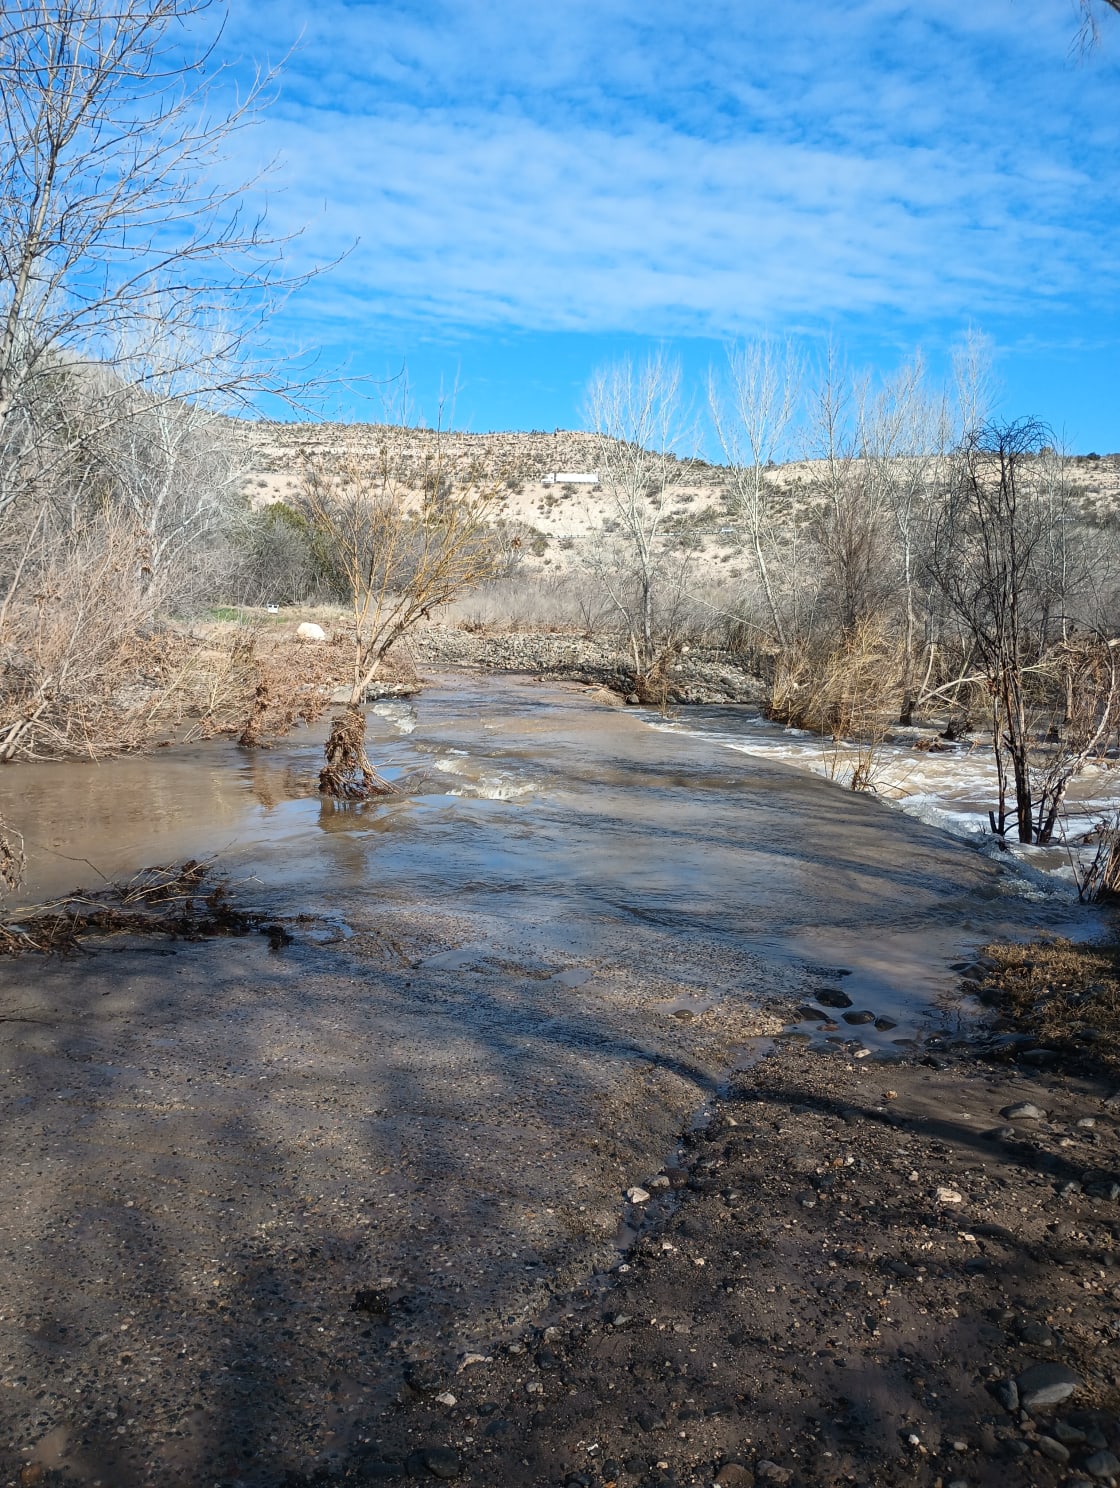 Low-water crossing after snow melt